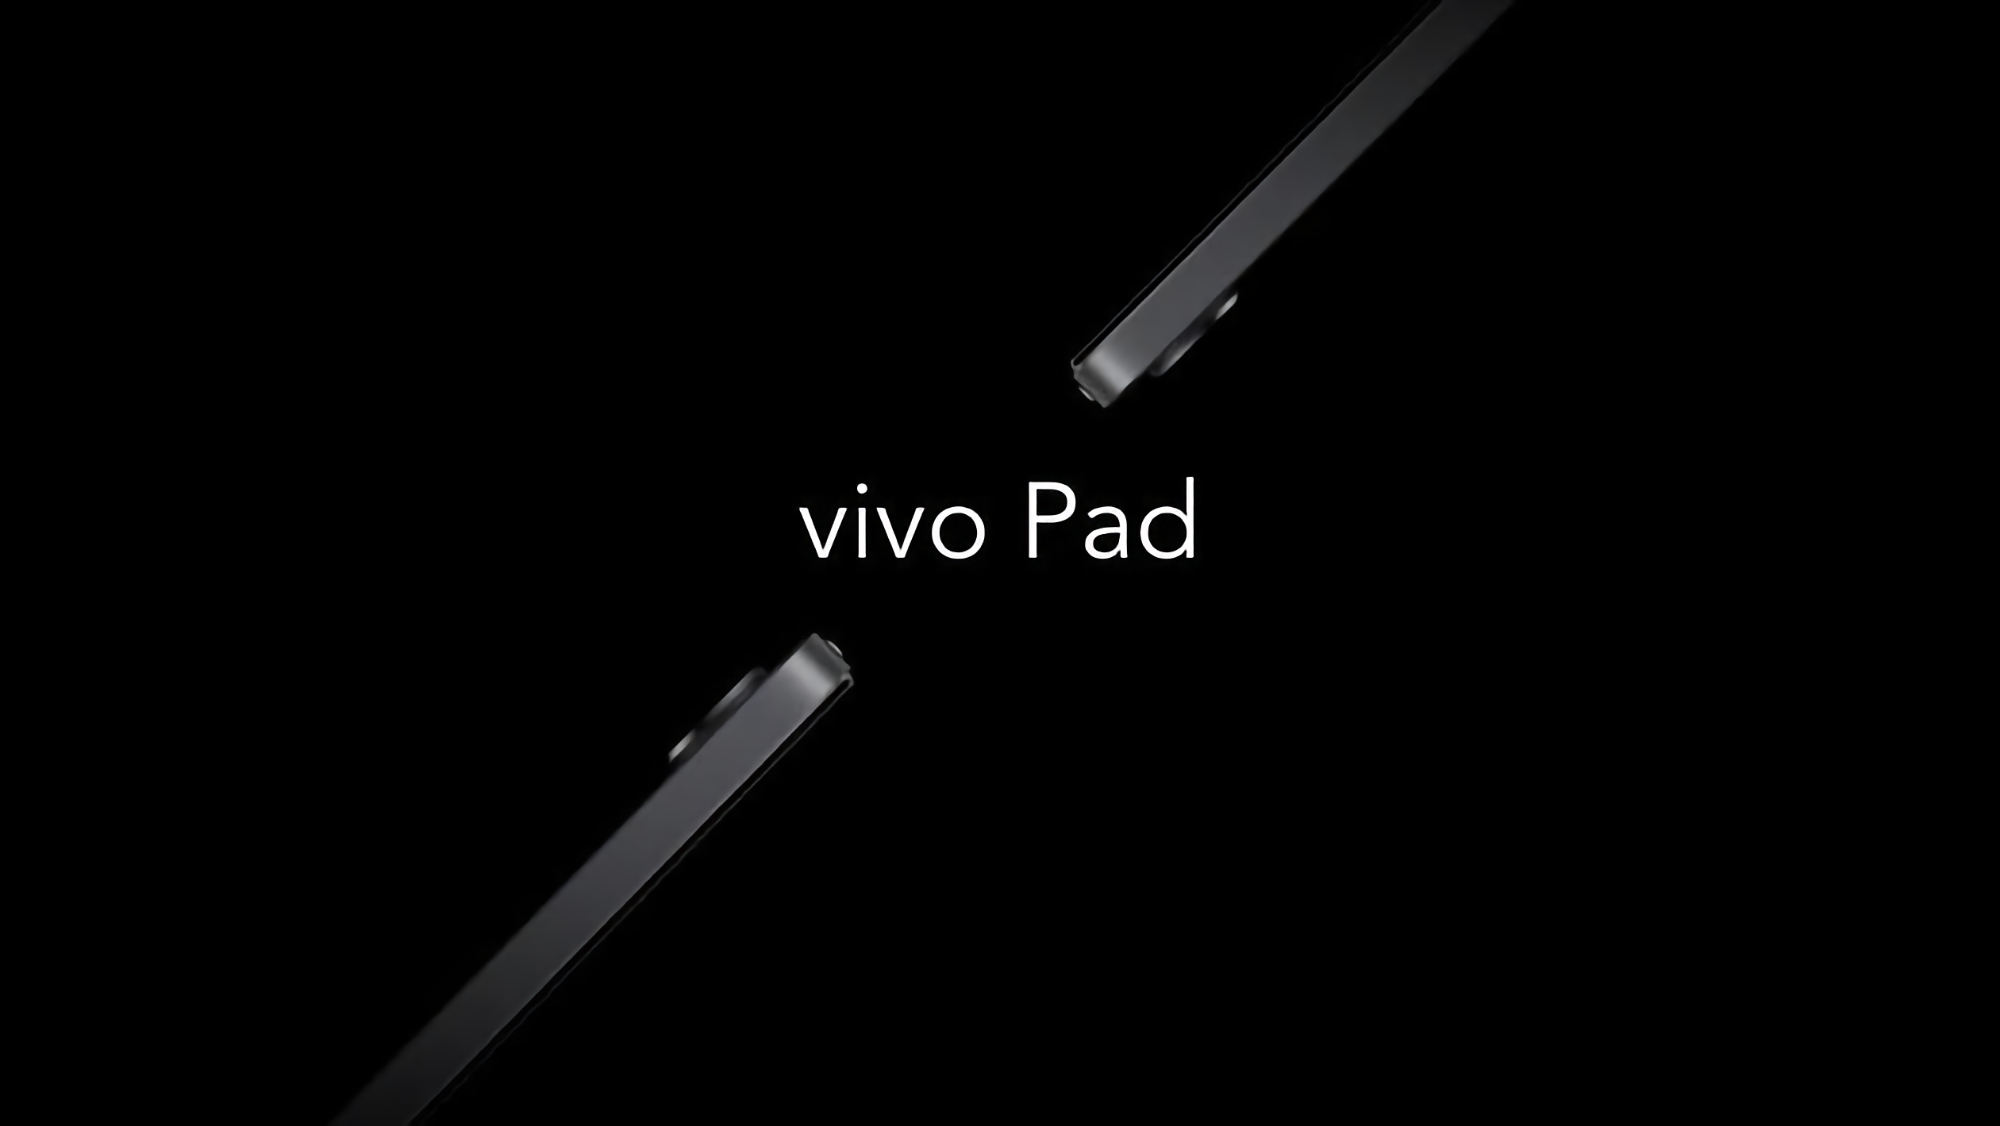 120Hz screen, Snapdragon 870 chip and 44W fast charging: Vivo's first tablet specs leak online